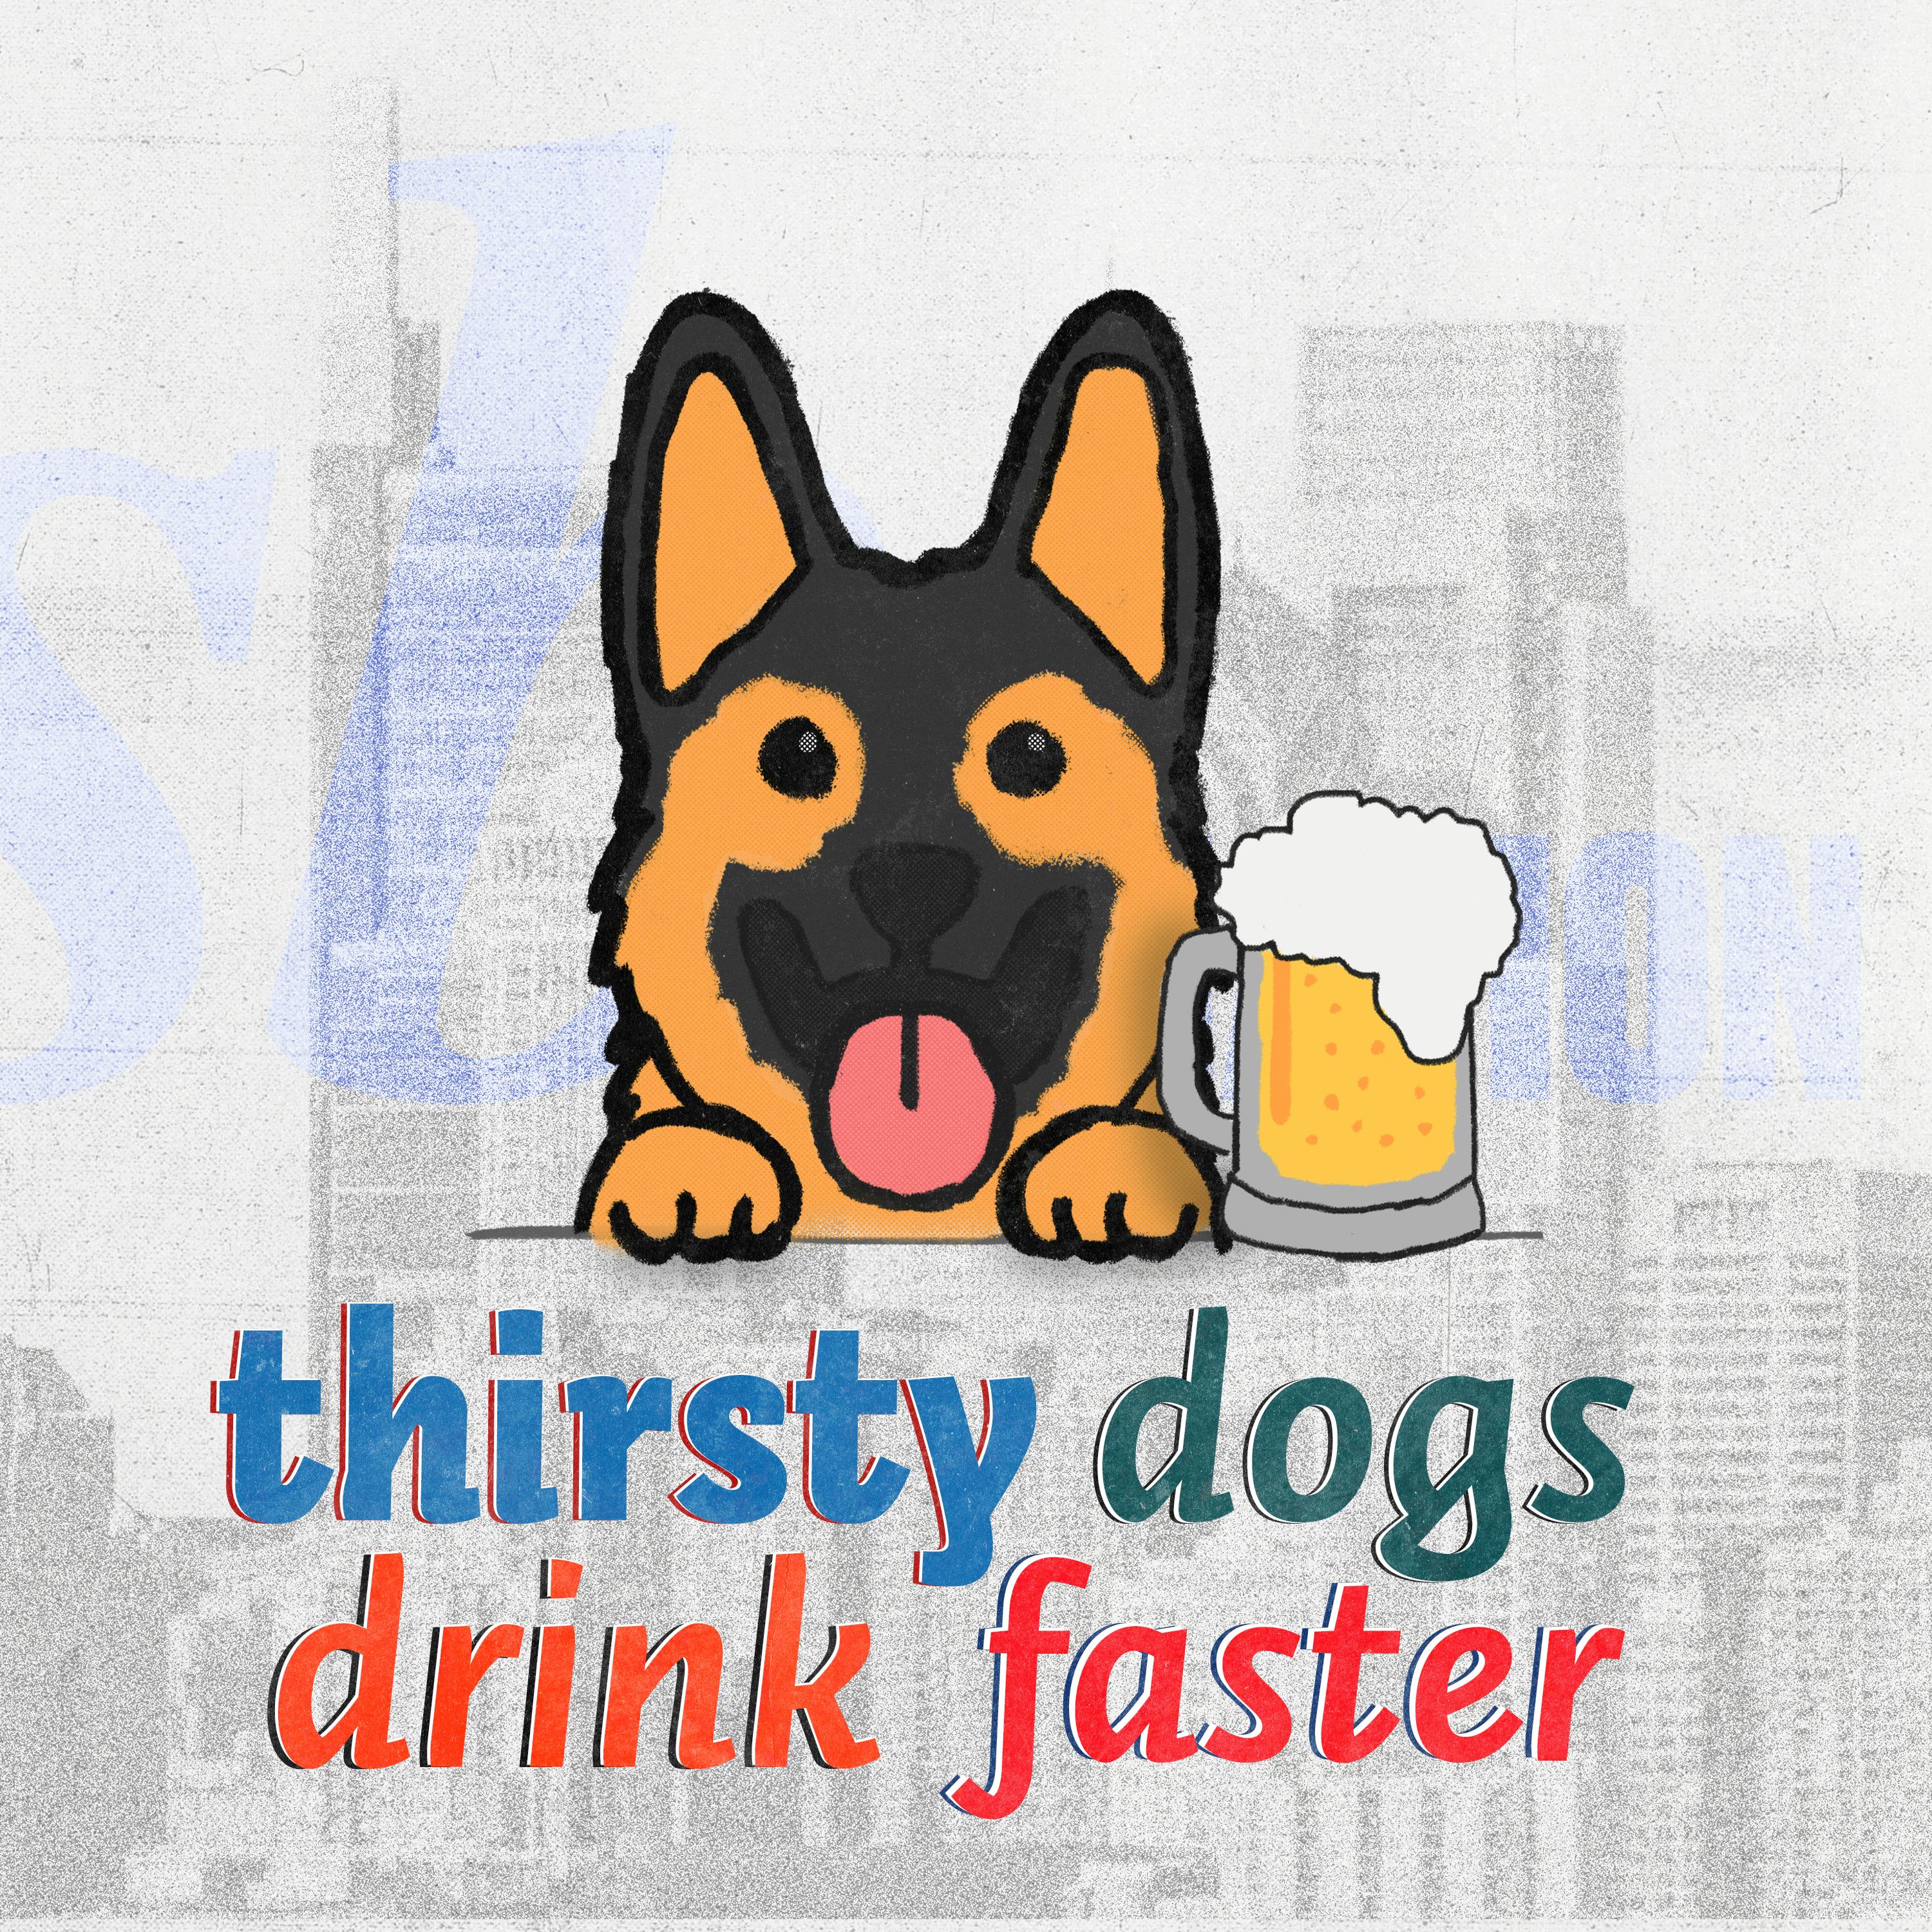 Thirsty Dogs Drink Faster: The Phillies are in the World Series! The Eagles will take on the Steelers and try to get to 7-0, while the Sixers are off to a rocky start. With Paul Hudrick and Shamus Cla